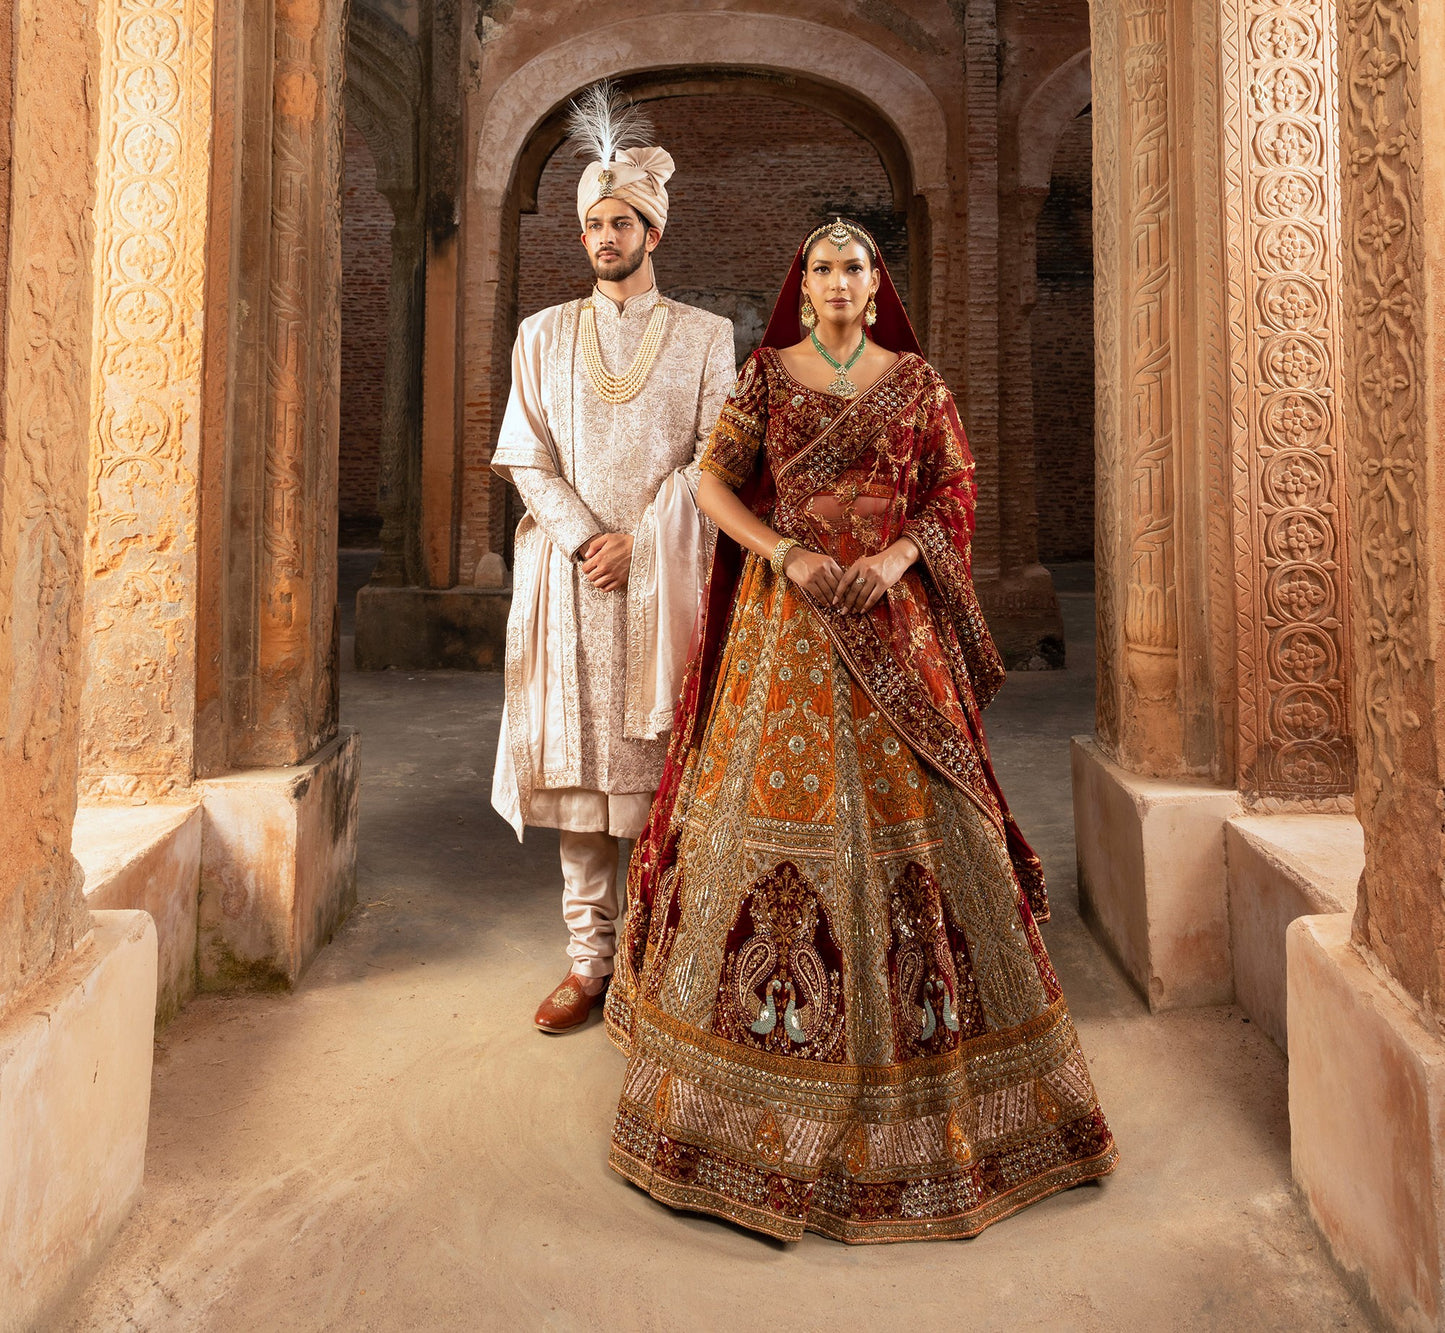 Legacy of Velvet Bridal Lehenga for Wedding with Intricate Embroidery